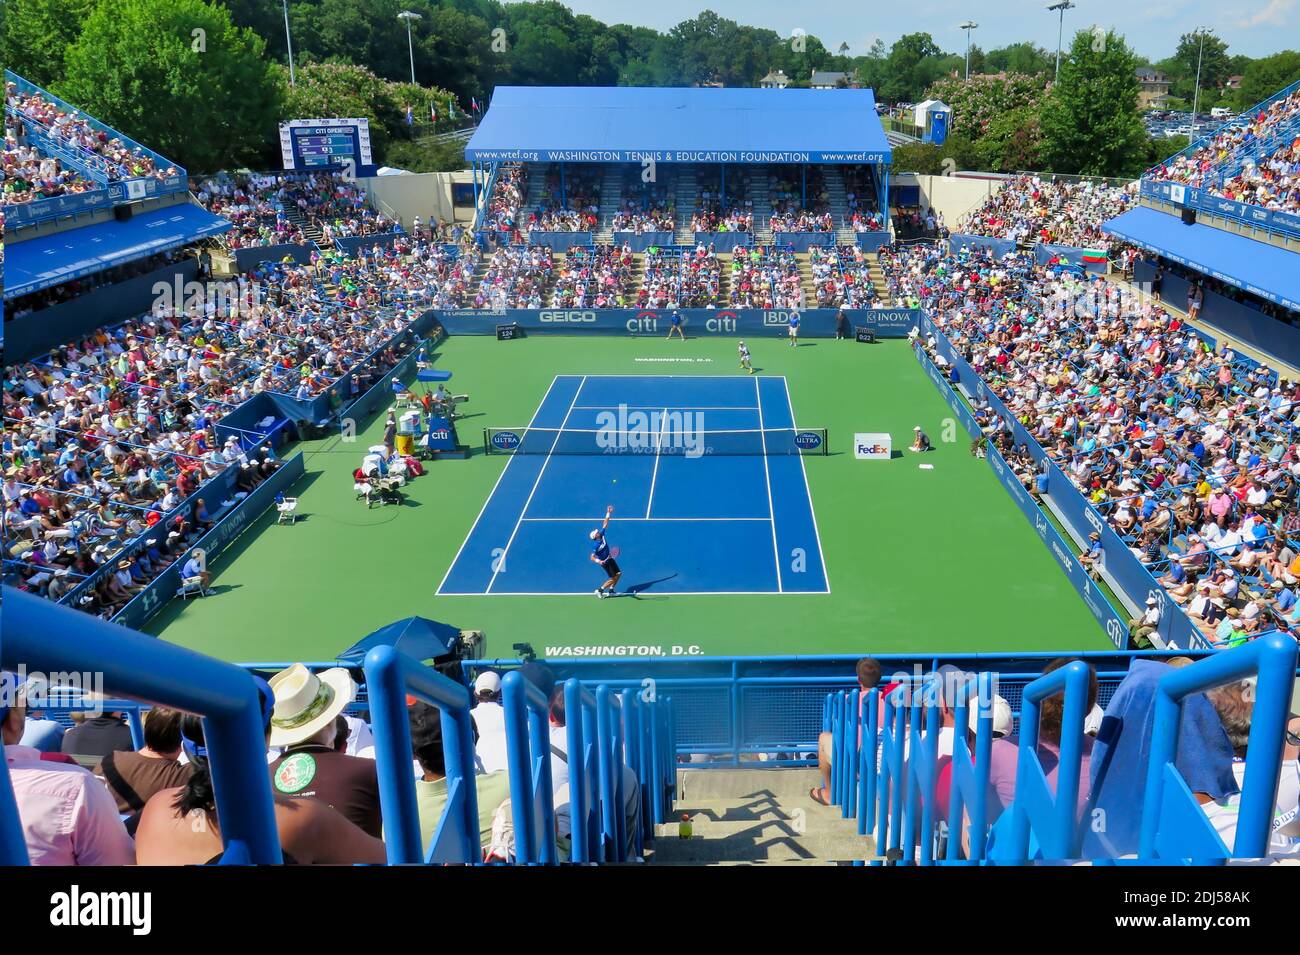 Singles match at the City Open tennis tournament in Washington dc Stock  Photo - Alamy